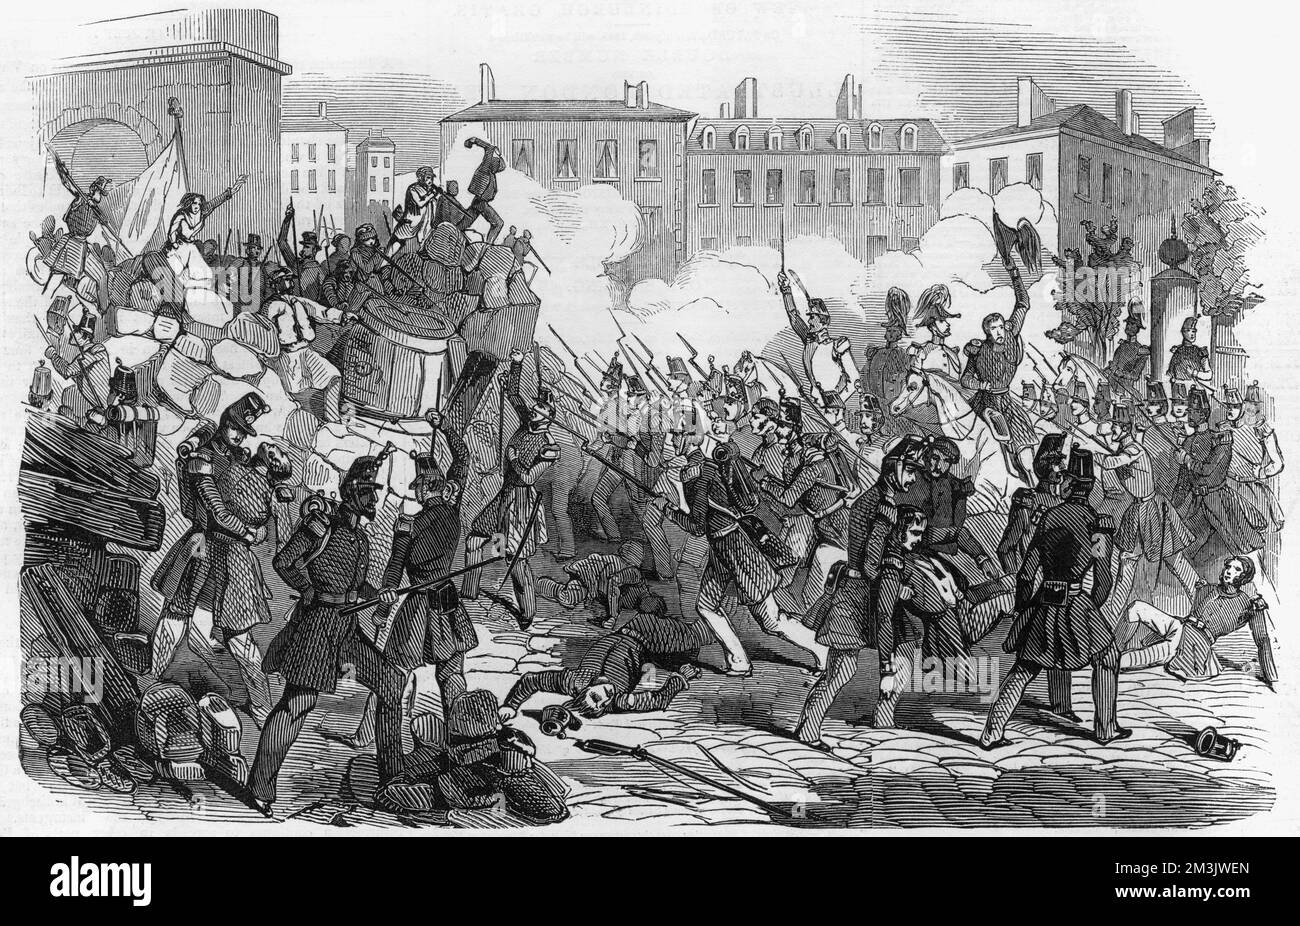 A barricade at the corner of the Boulevard Rue Mazagran in Paris, 1848. In France, the catalyst for the revolutions in the rest of Europe, the monarchy was replaced by the Second Republic, with Louis Napoleon as president from 1852.  A series of revolts occurred in various parts of Europe against monarchical rule. Although some of the revolutionaries had republican ideas, many more were motivated by economic grievances.  None of the revolutions enjoyed any lasting success, and most were violently suppressed within a few months.     Date: 1848 Stock Photo